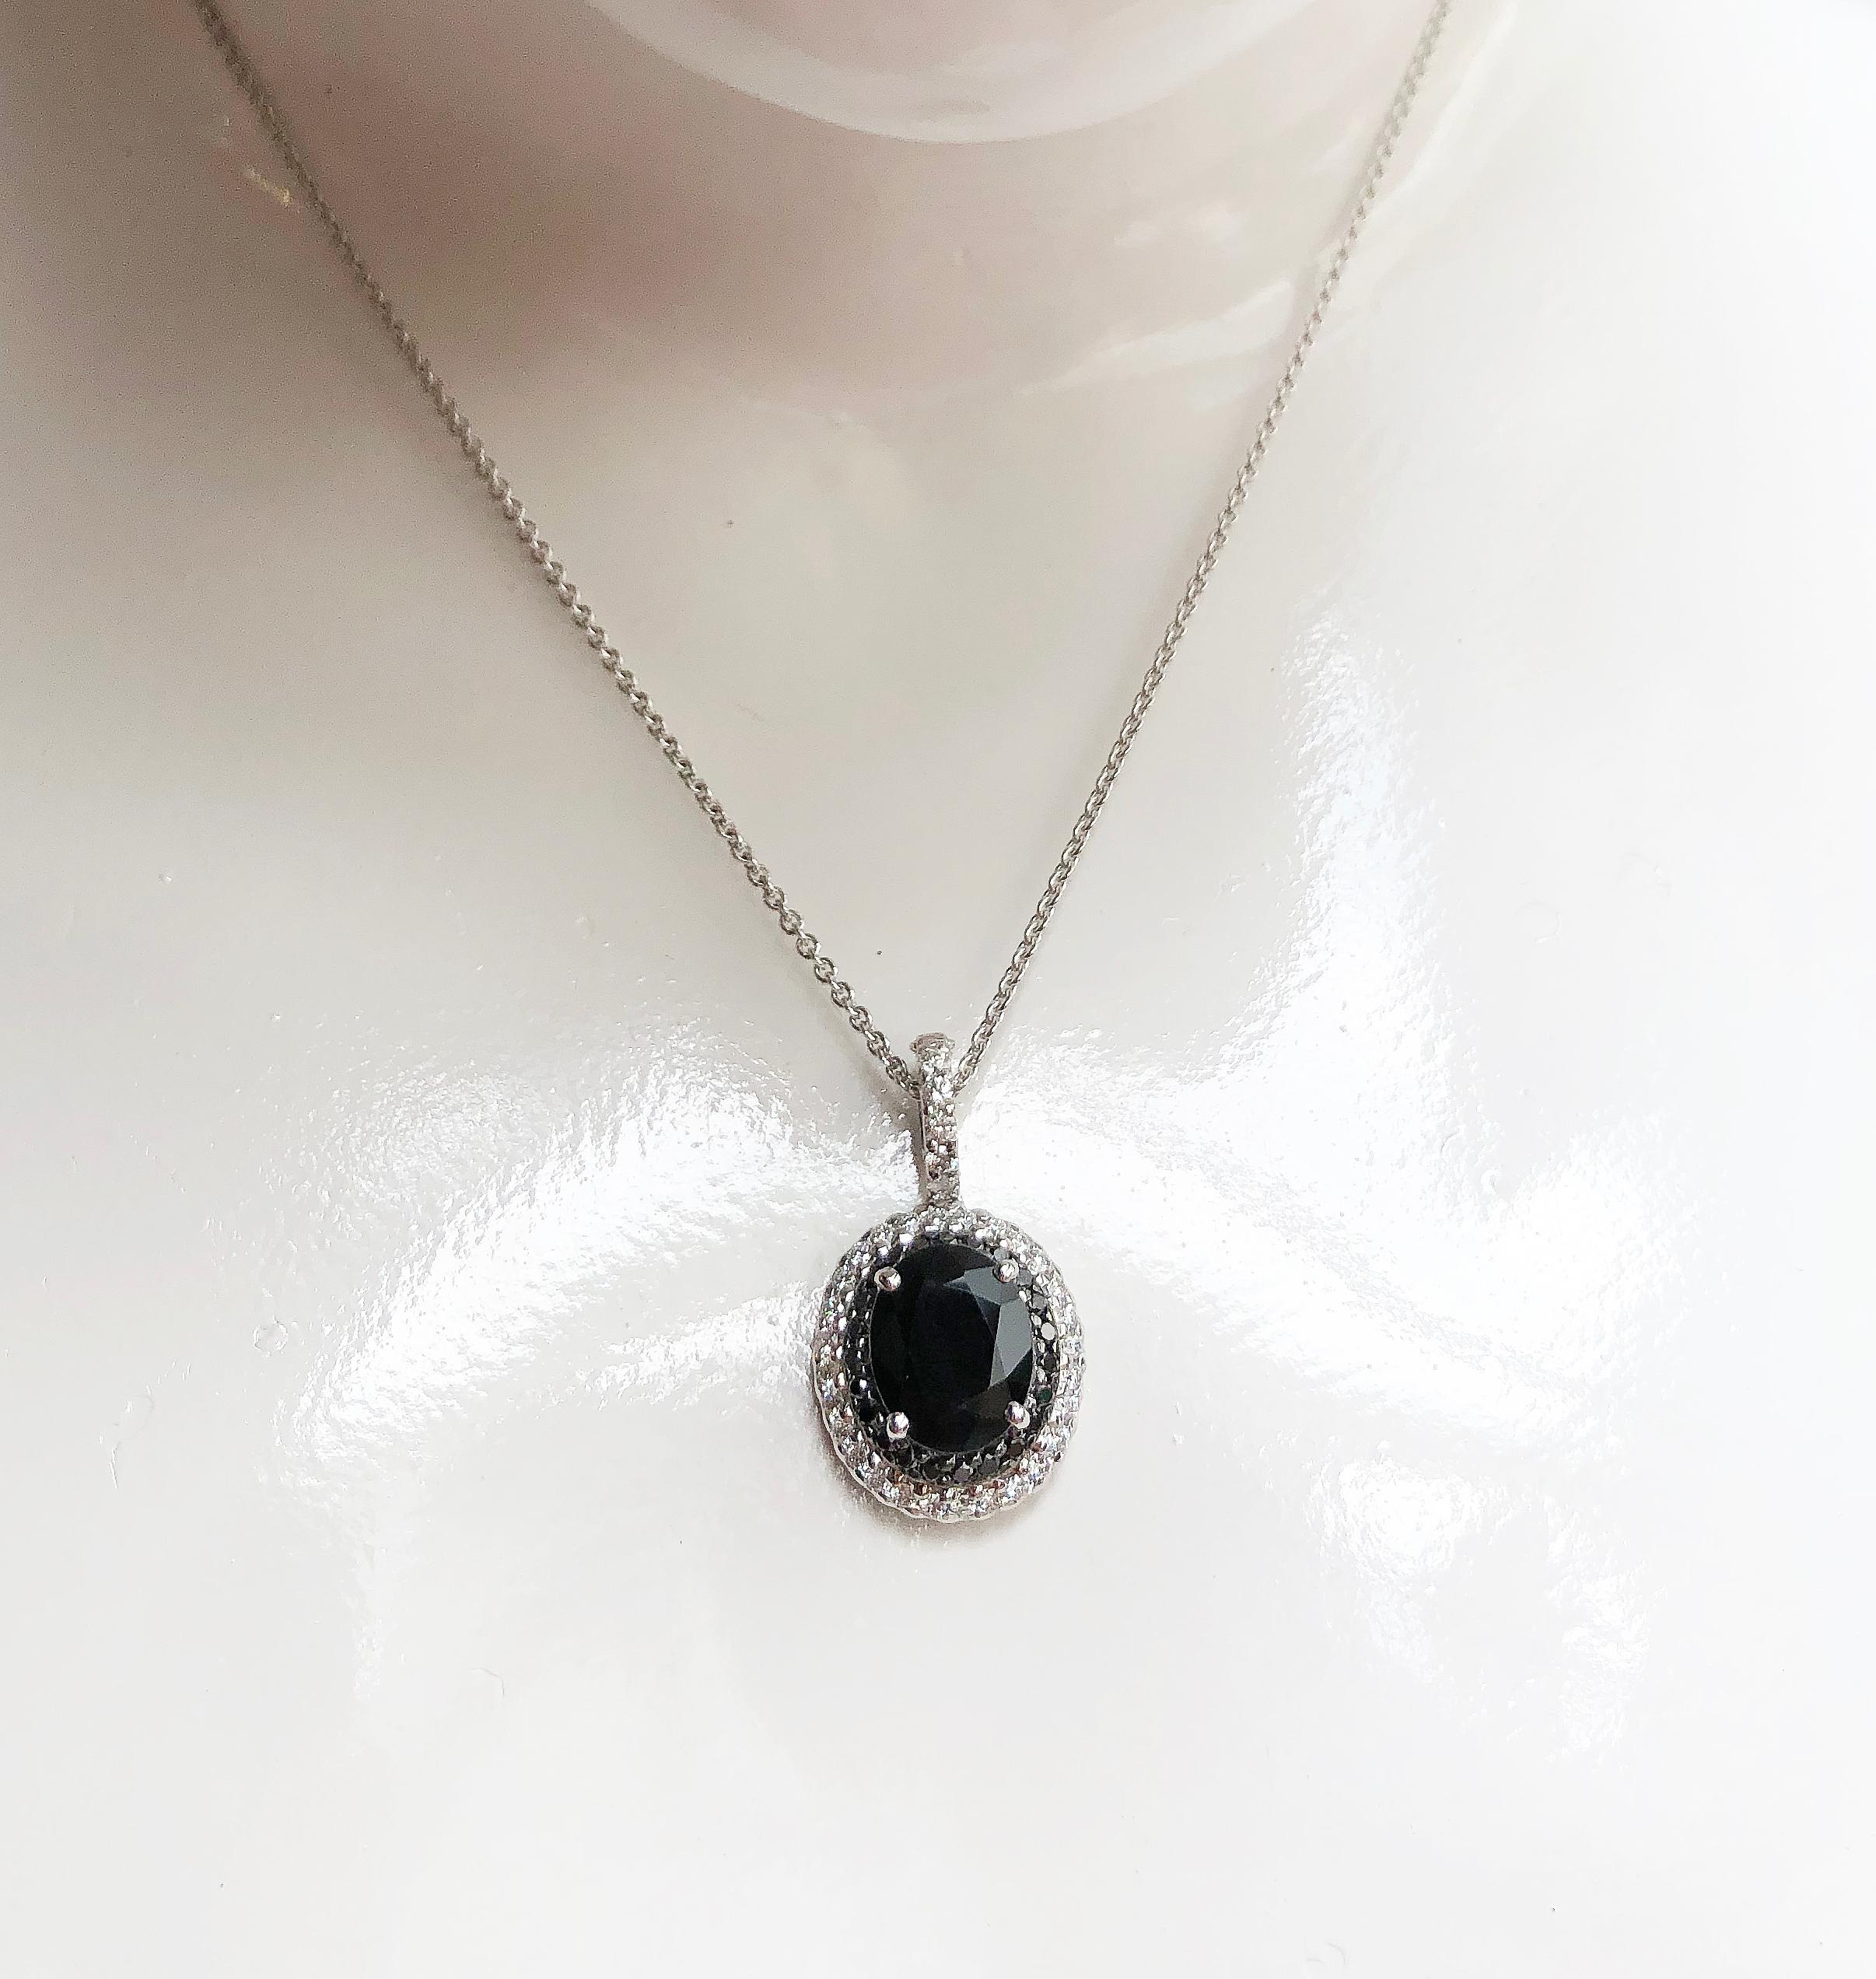 Black Sapphire 4.98 carats with Diamond 0.51 carats and Black Diamond 0.29 carats Pendant set in 18 Karat White Gold Settings
(chain not included)

Width: 1.6 cm
Length: 2.6 cm 

